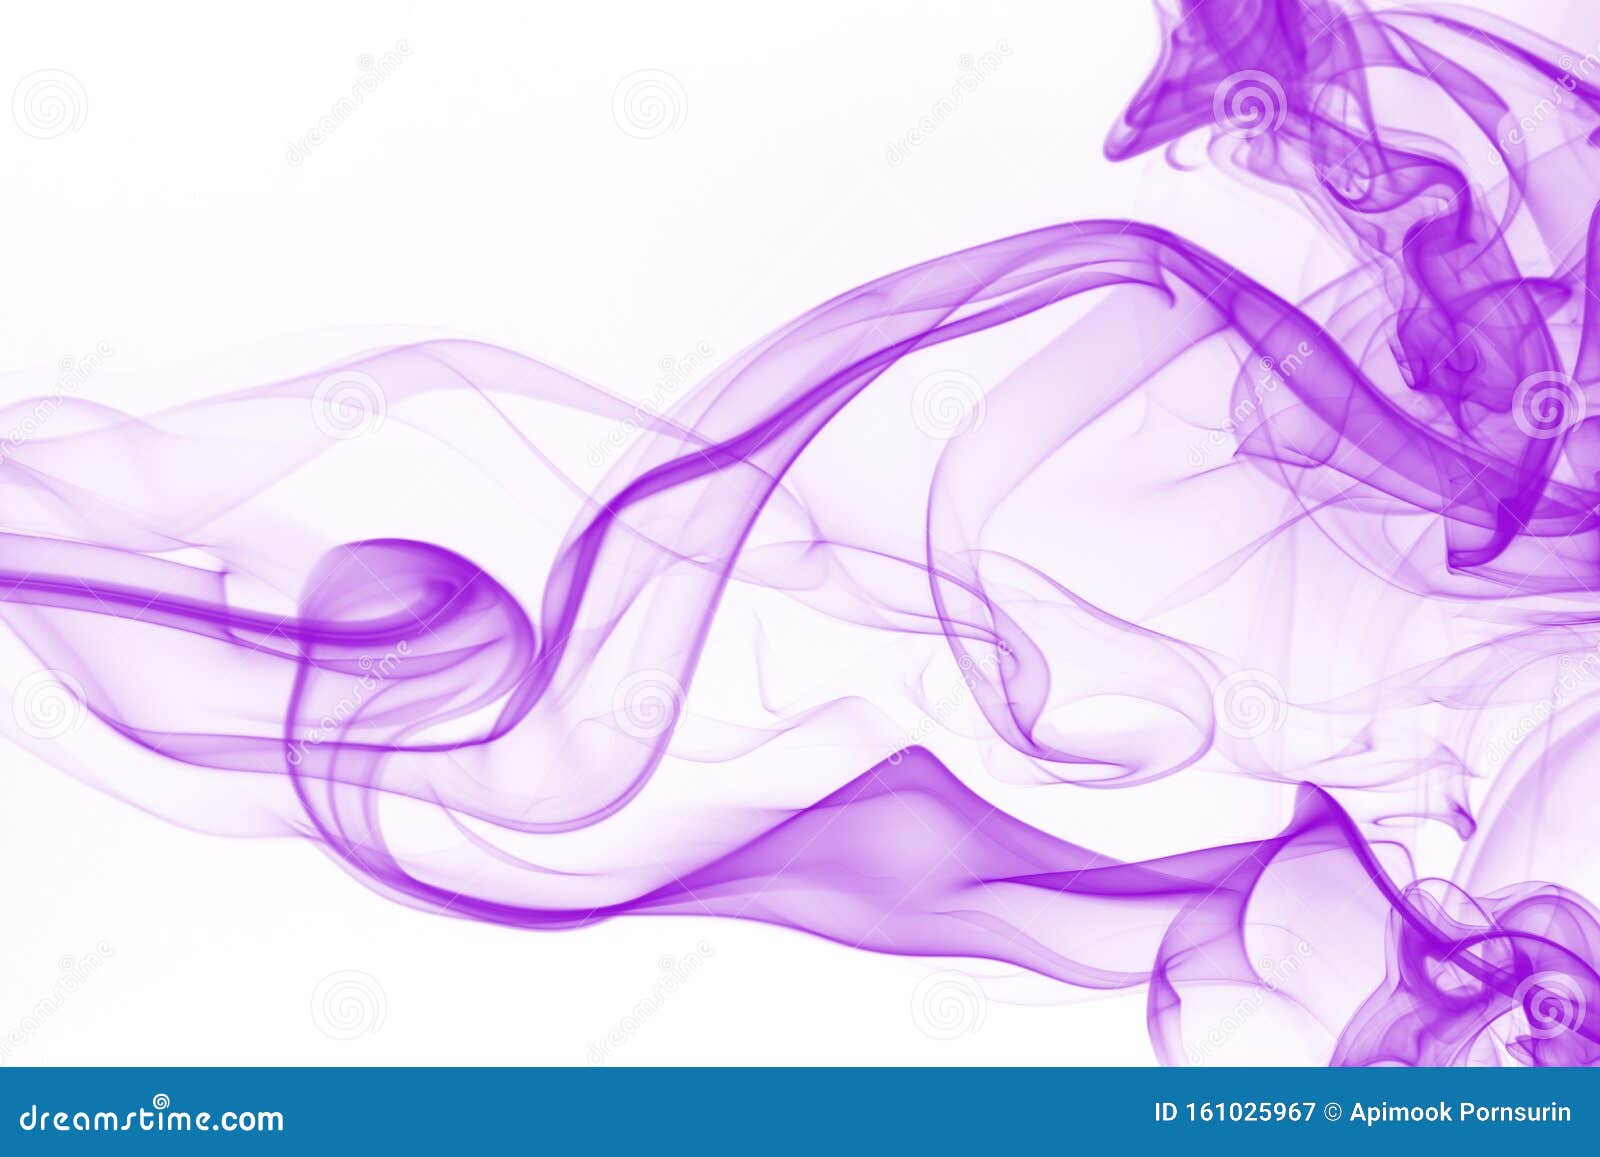 Purple Smoke Motion Abstract on White Background Stock Image - Image of  graphic, concept: 161025967